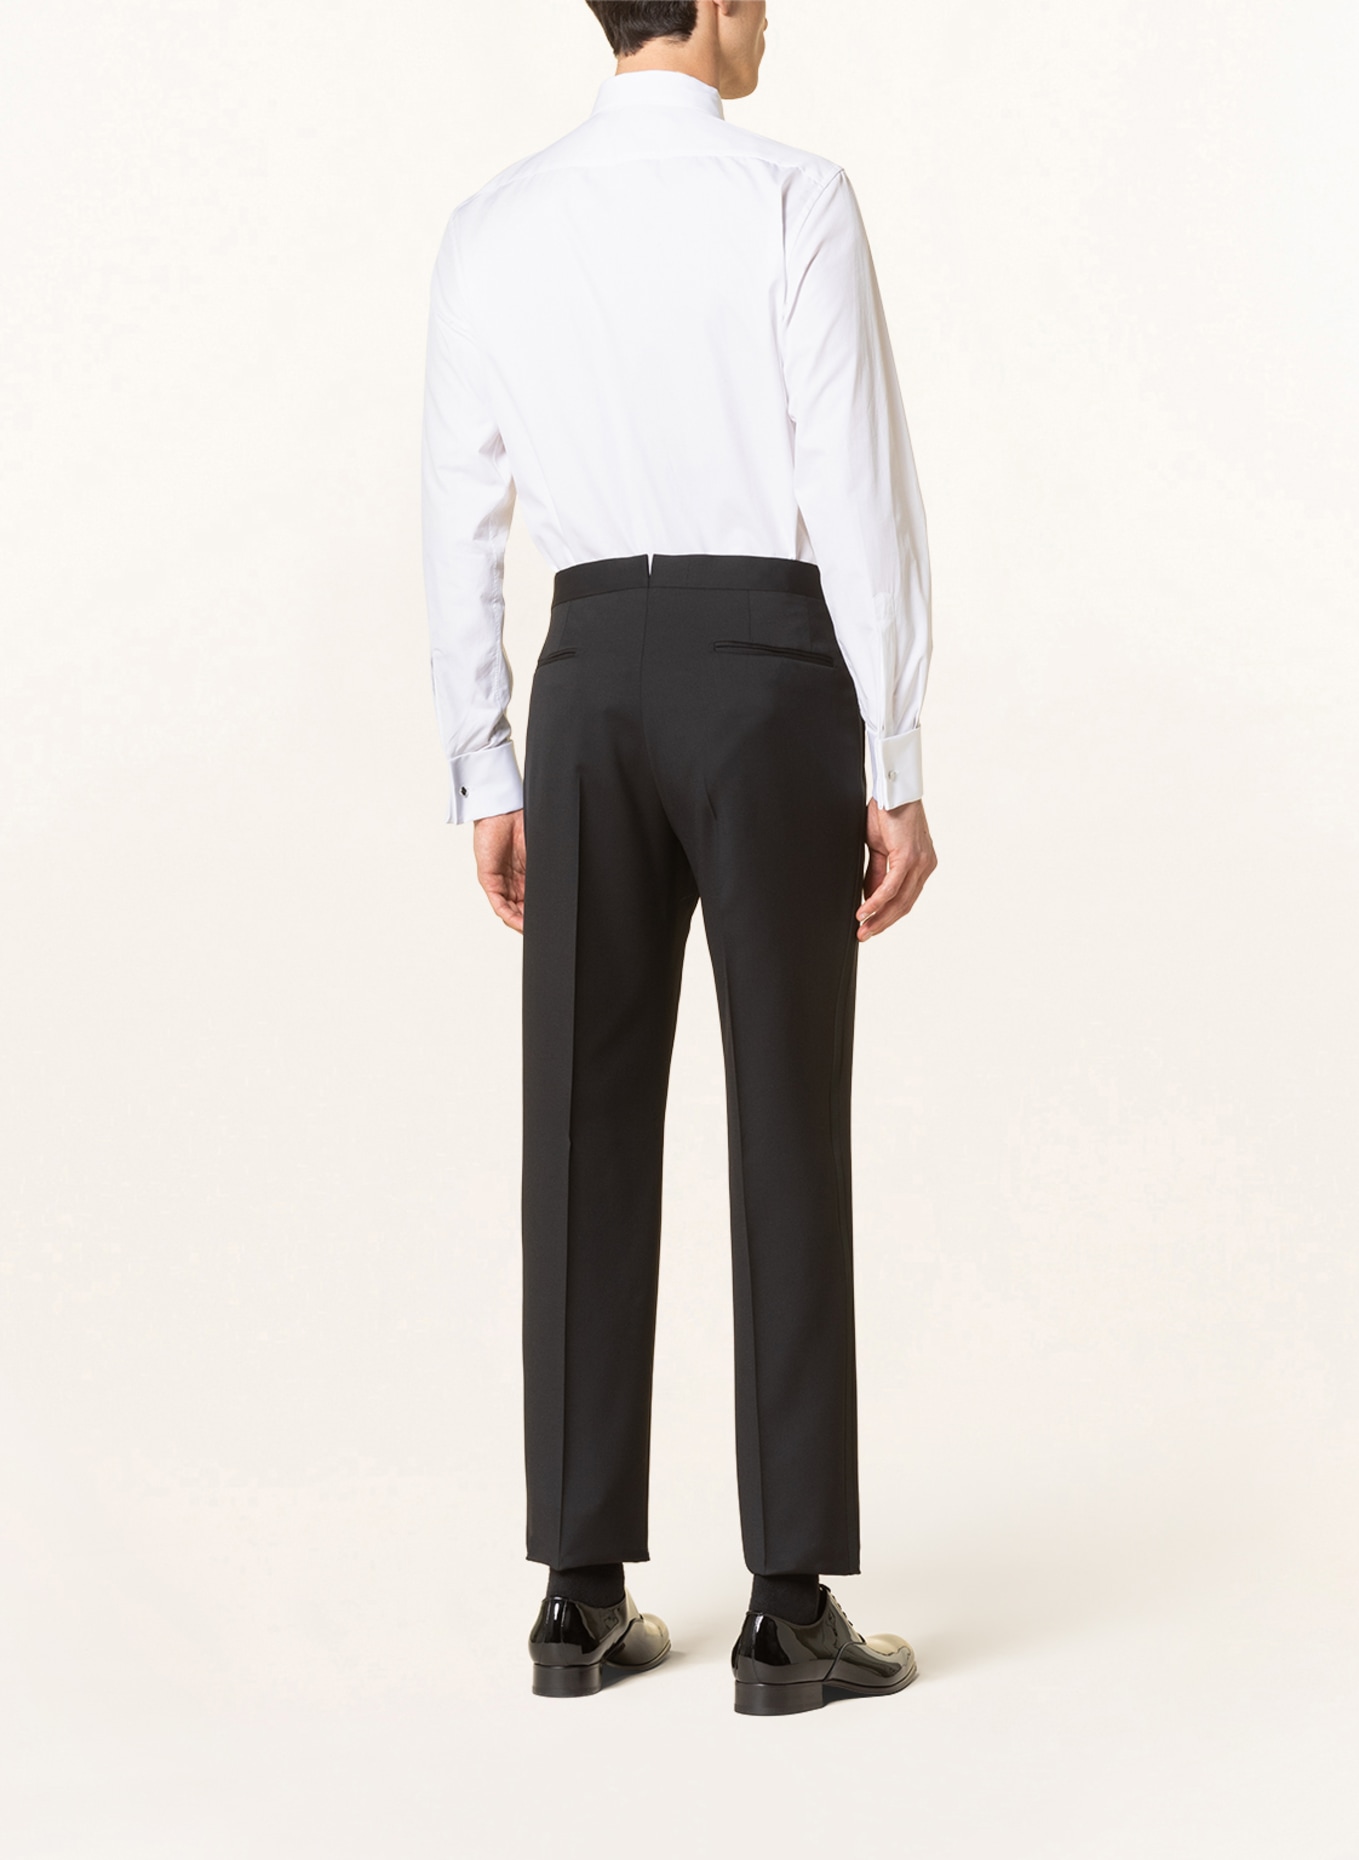 ZEGNA Tuxedo shirt regular fit with French cuffs, Color: WHITE (Image 3)